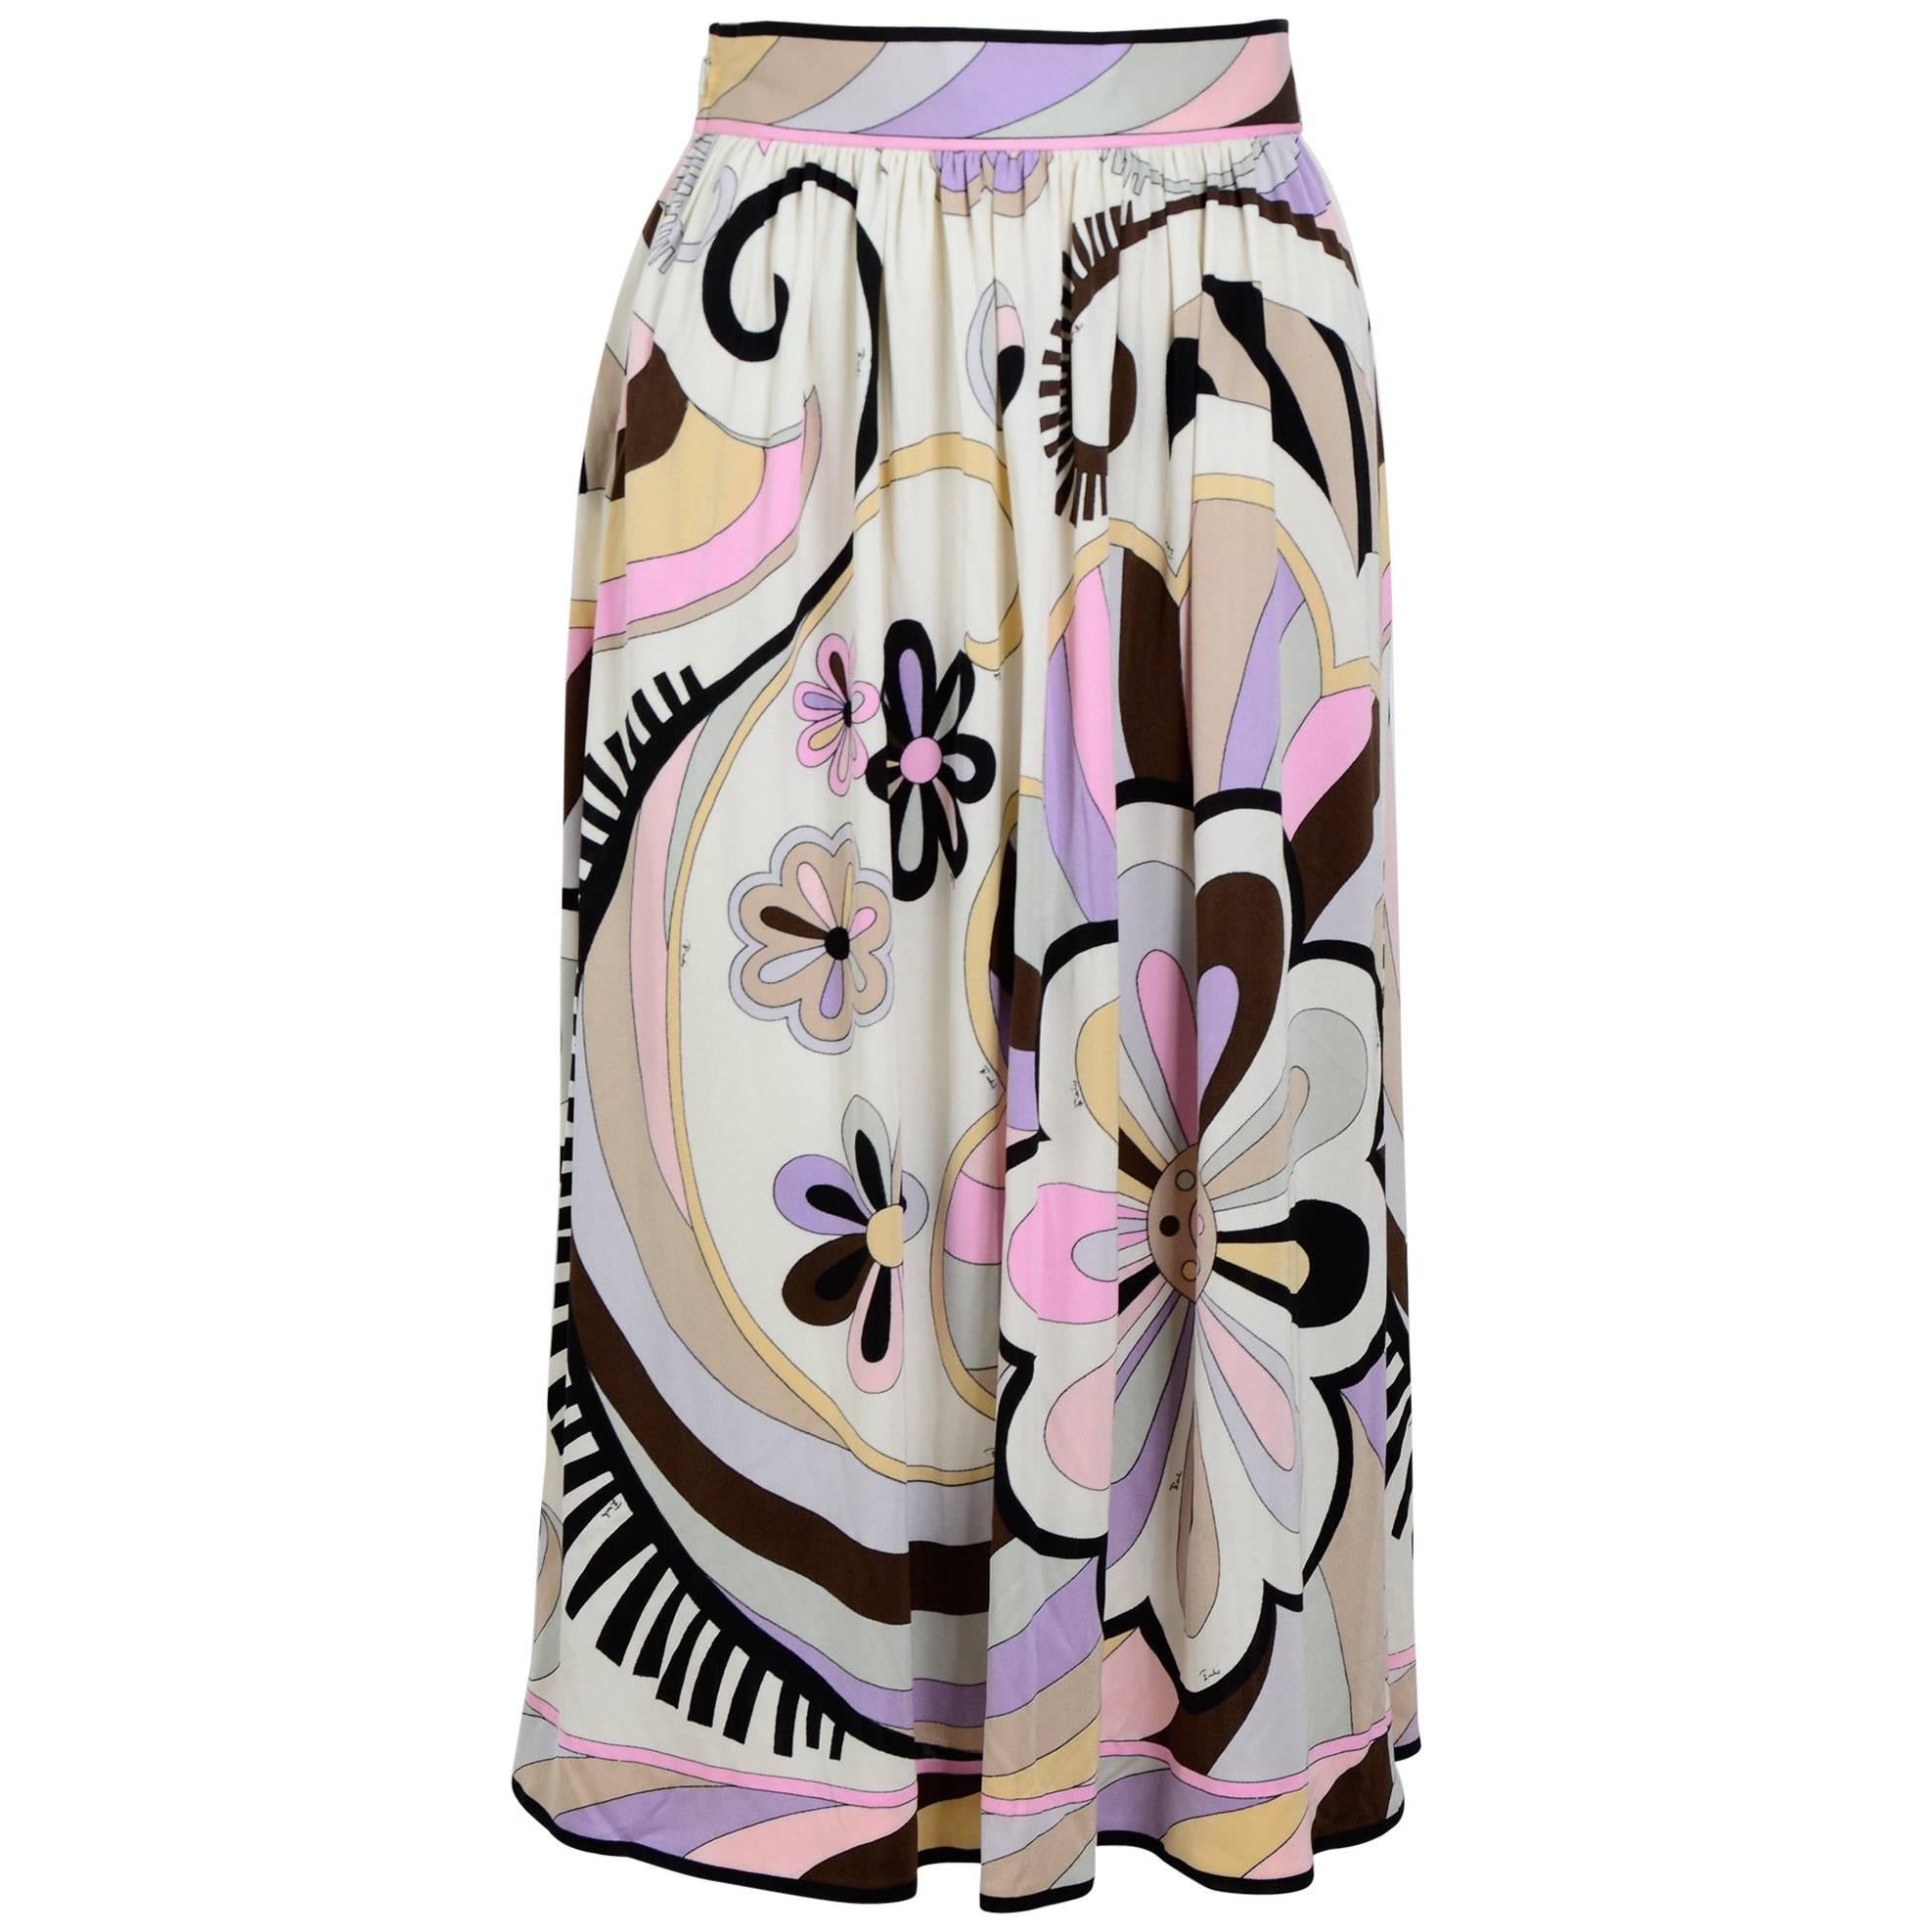 1970's vintage Emilio Pucci signed silk jersey skirt